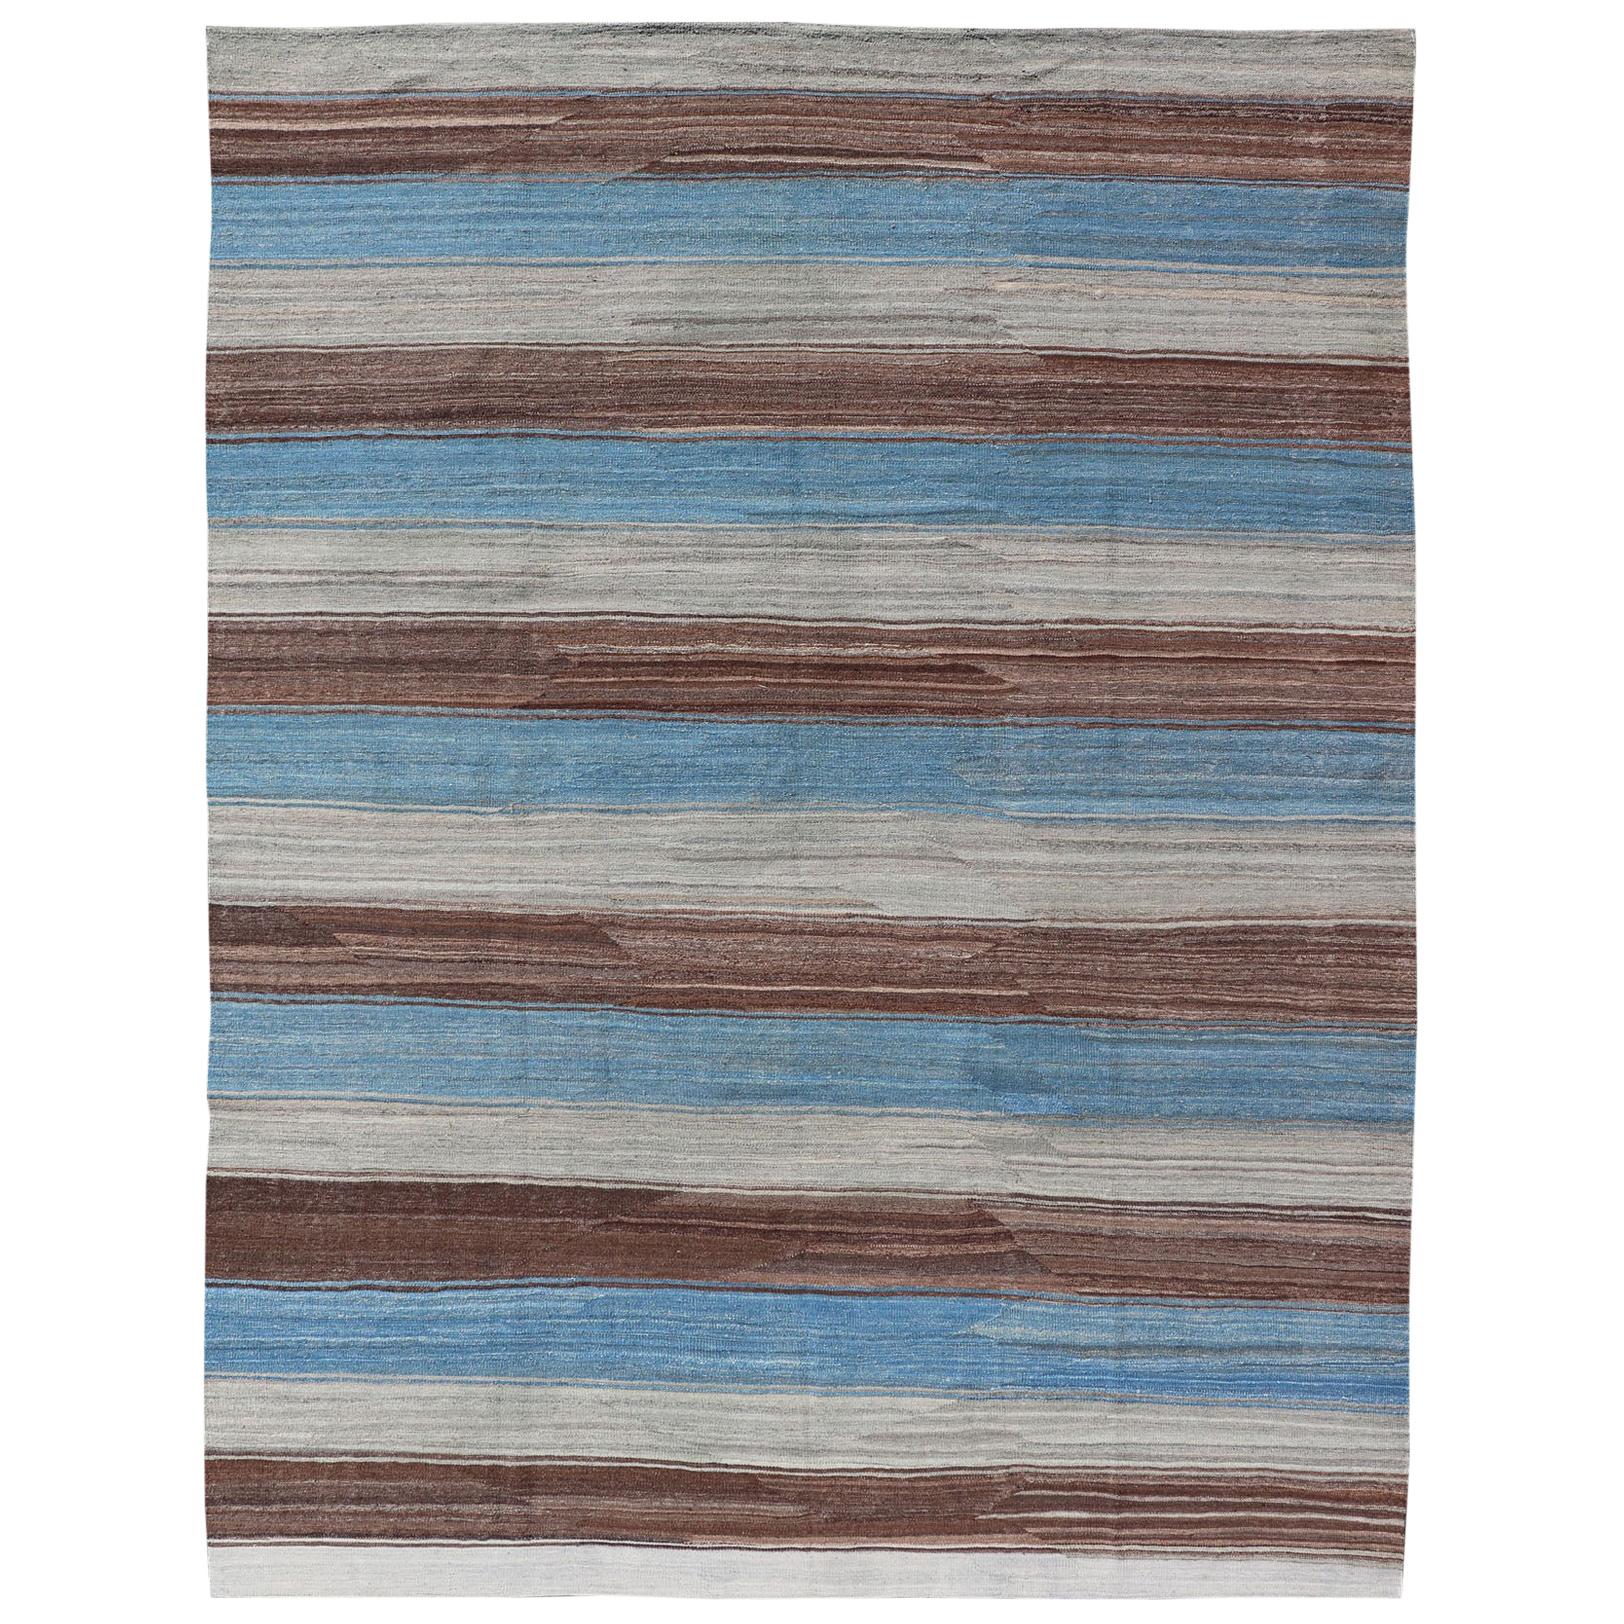 Modern Kilim Rug with Stripes in Shades of Blue, Brown, Light Gray and Cream